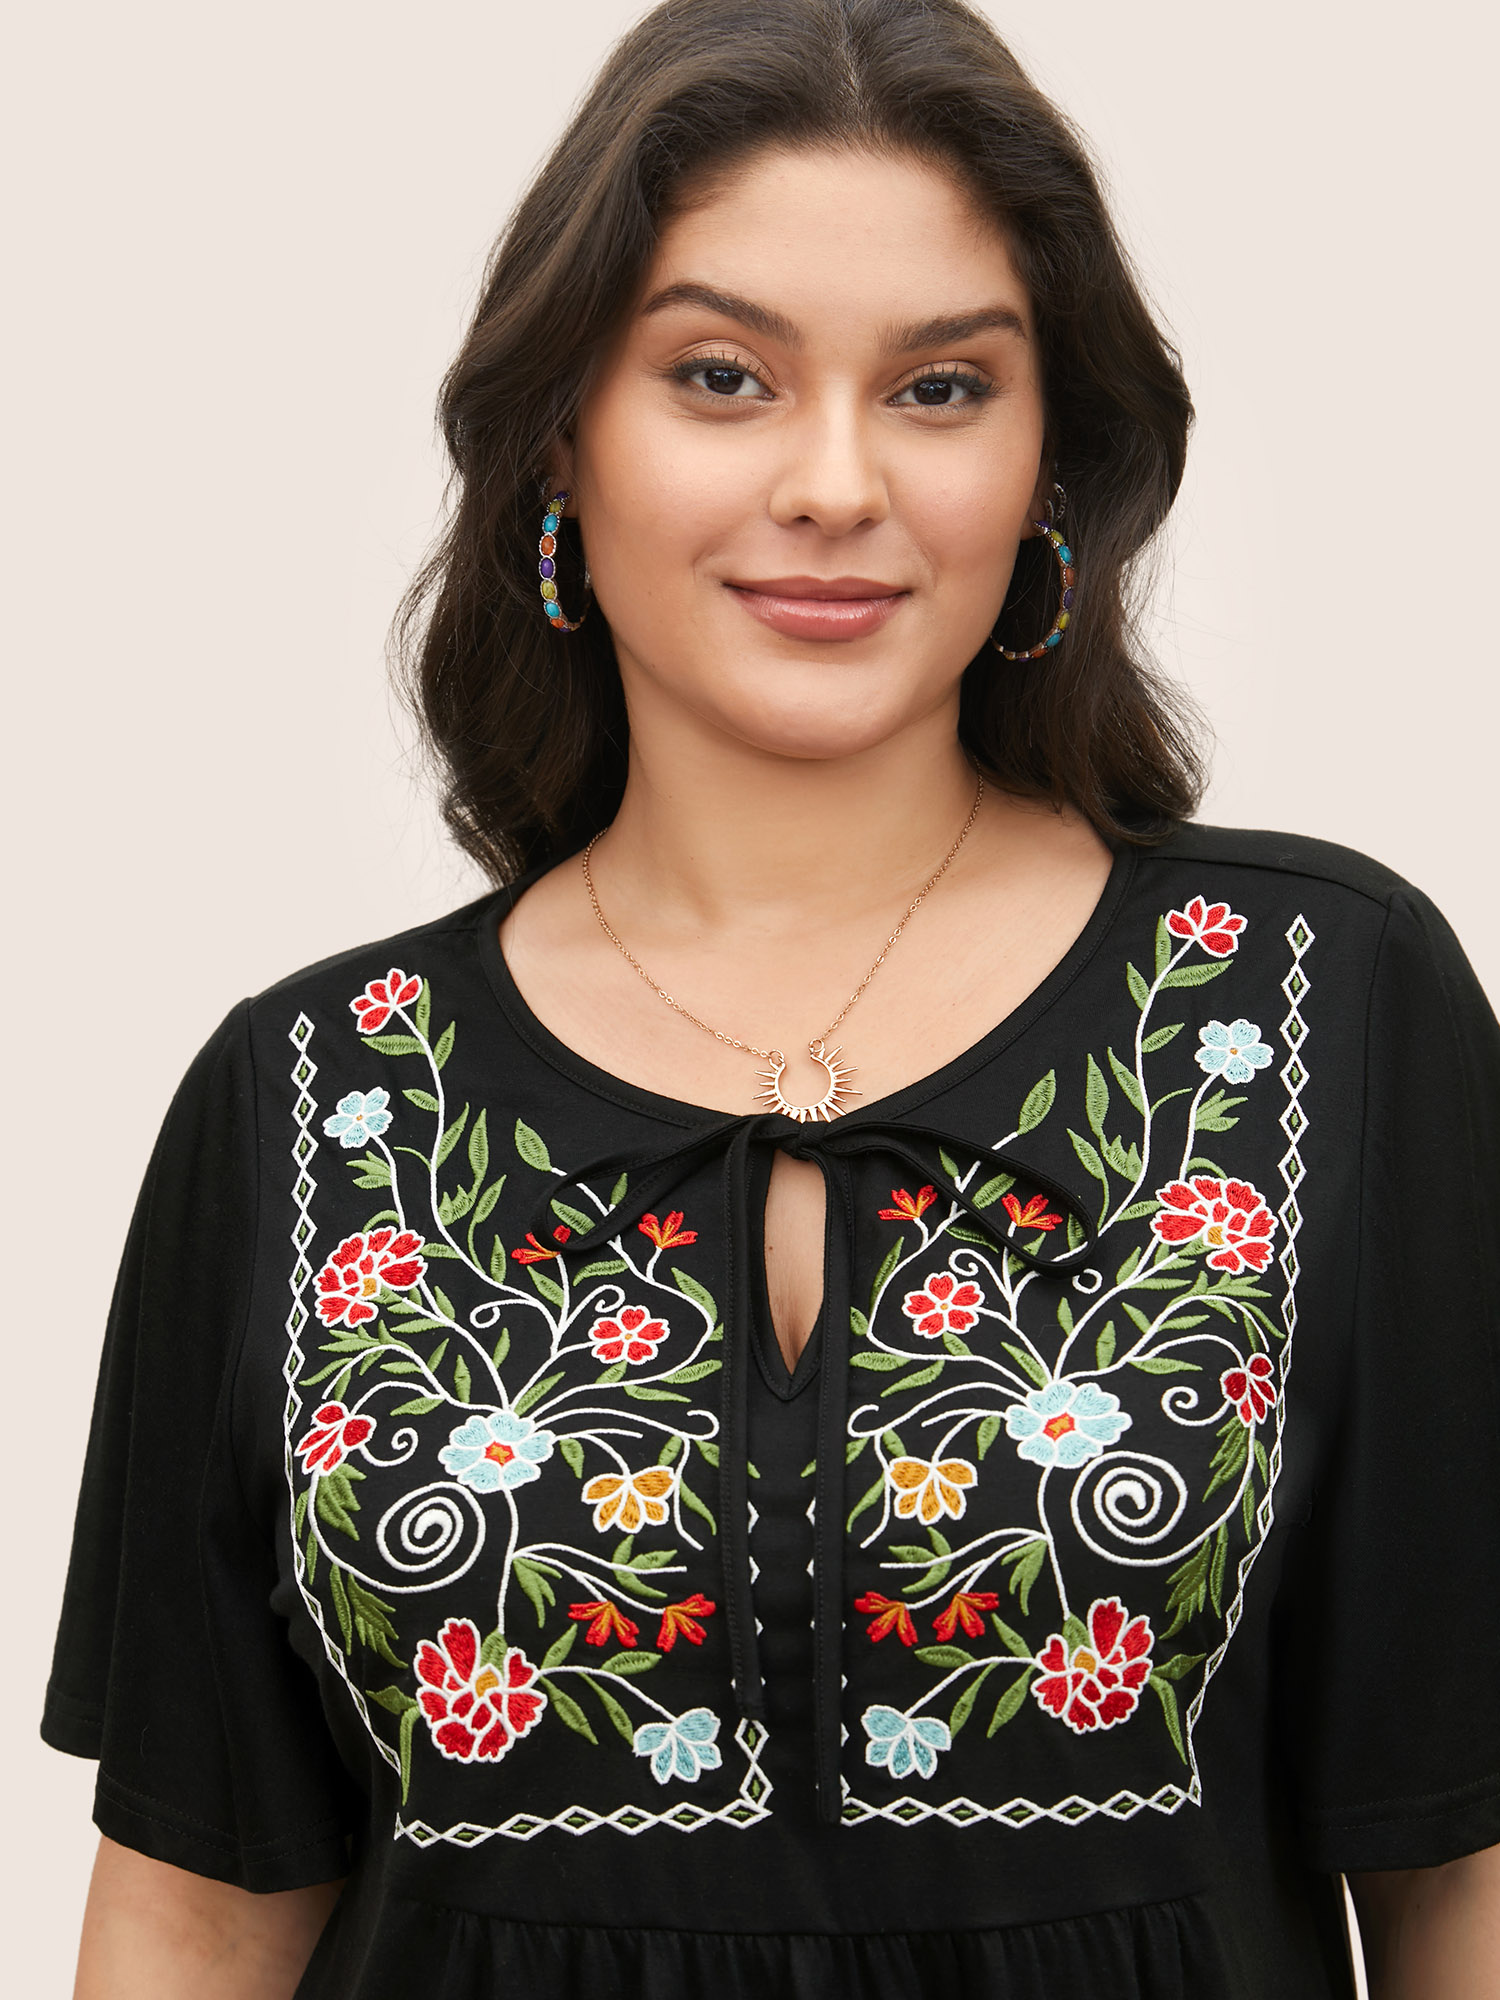 

Plus Size Floral Embroidered Tie Knot Gathered T-shirt Black Women Resort Tie knot Round Neck Vacation T-shirts BloomChic